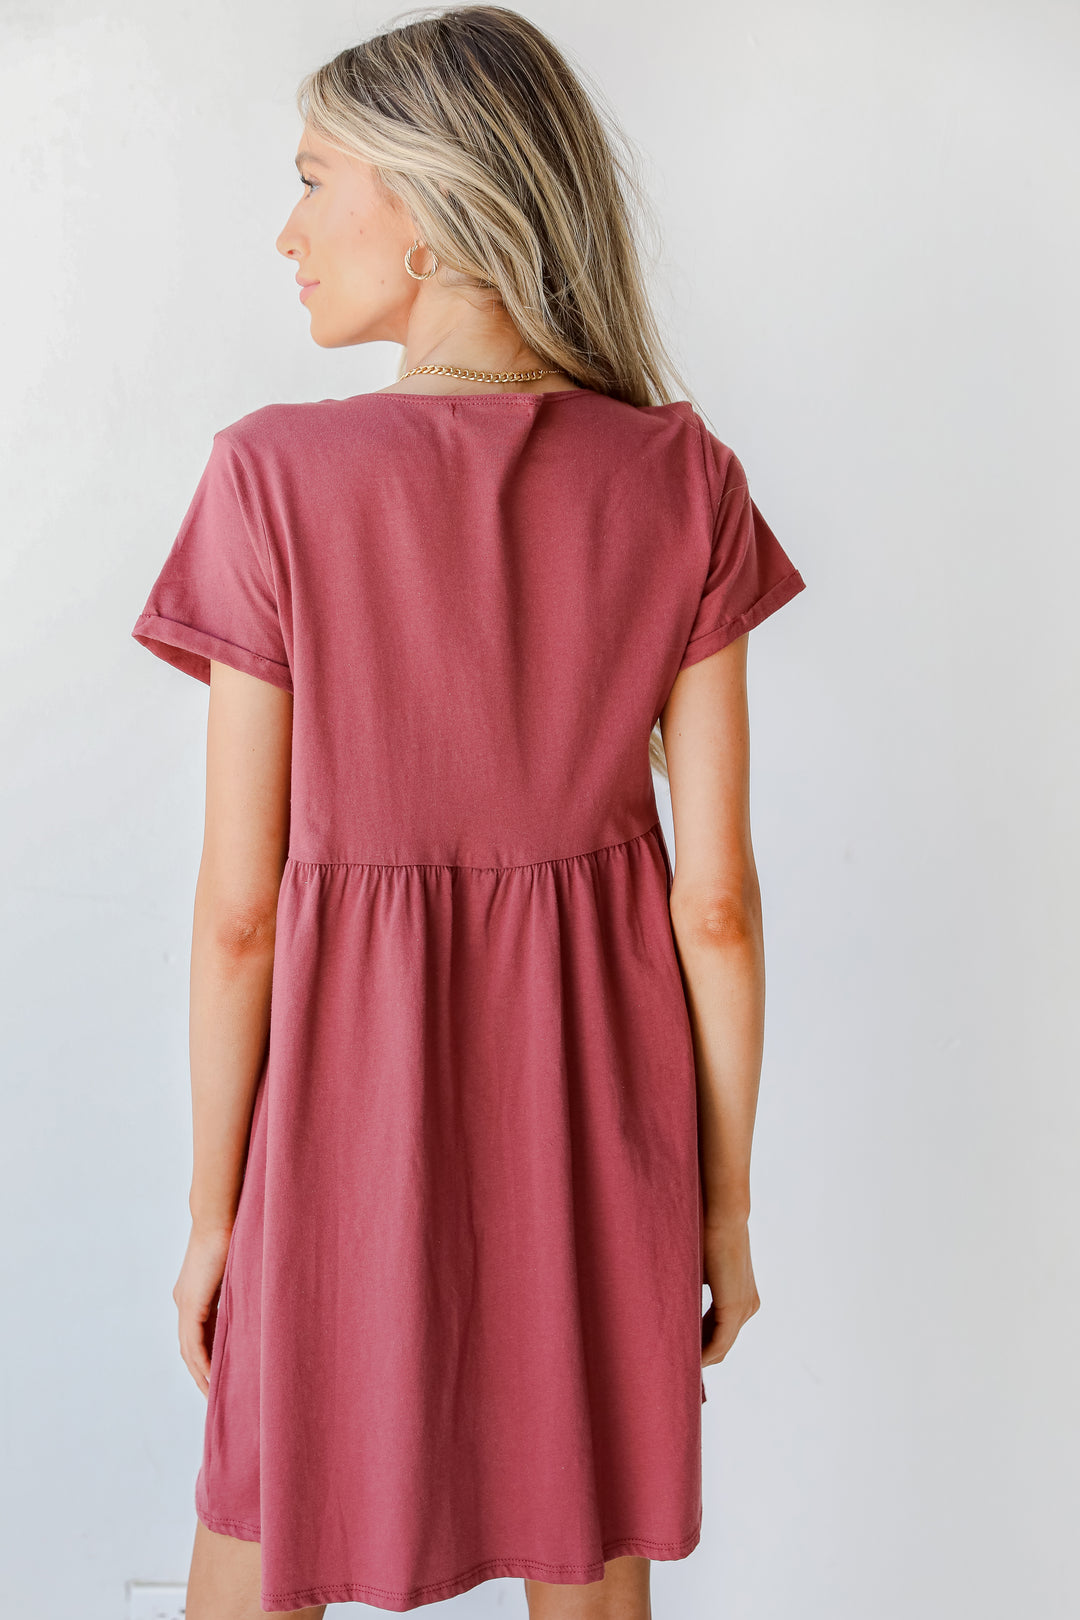 Button Front Babydoll Dress in marsala back view